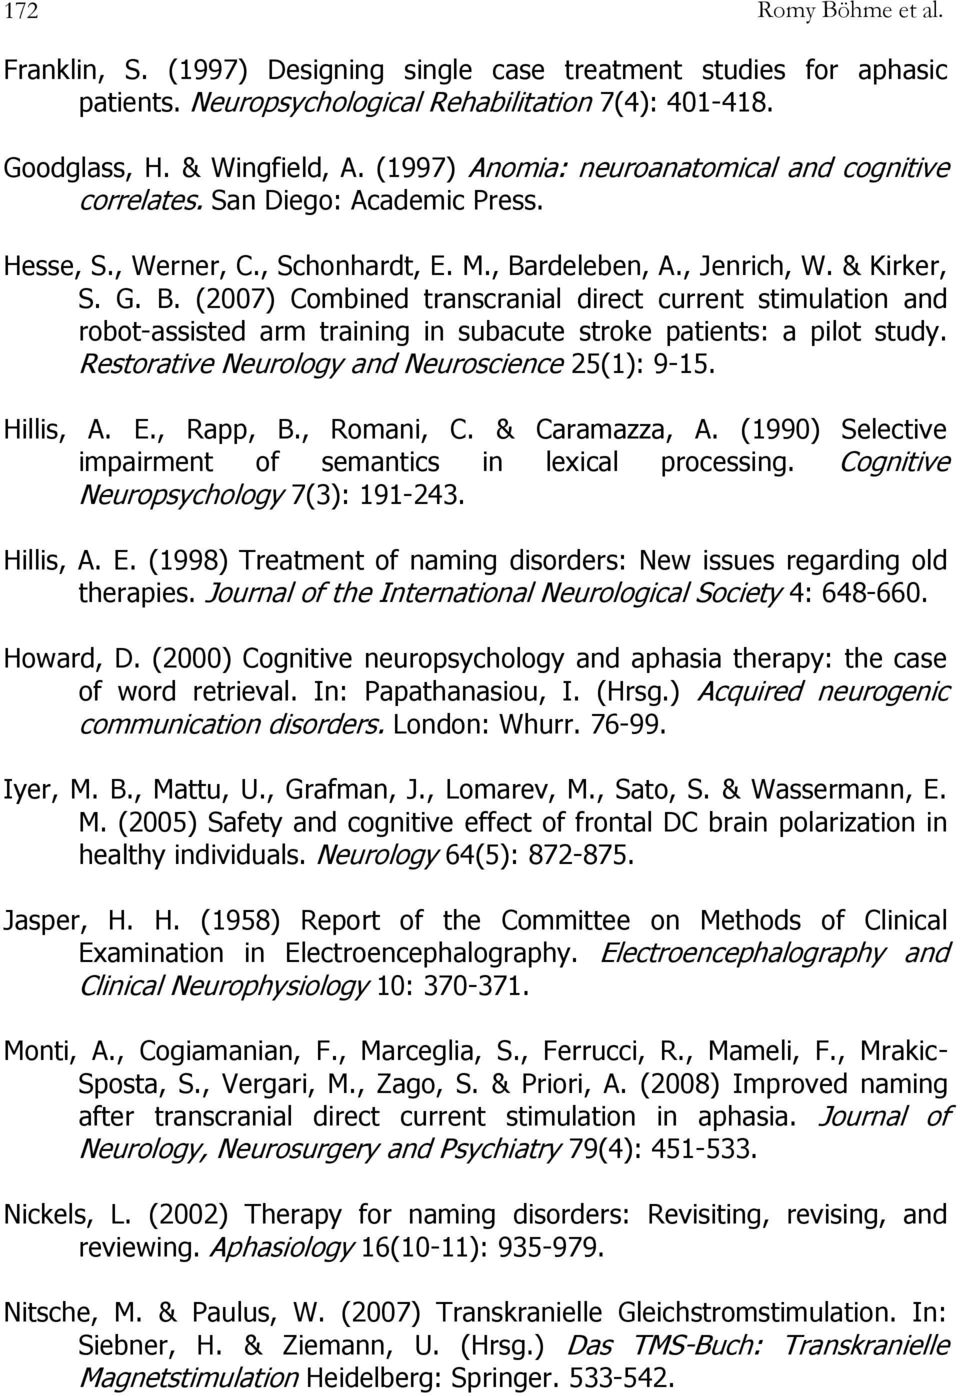 rdeleben, A., Jenrich, W. & Kirker, S. G. B. (2007) Combined transcranial direct current stimulation and robot-assisted arm training in subacute stroke patients: a pilot study.